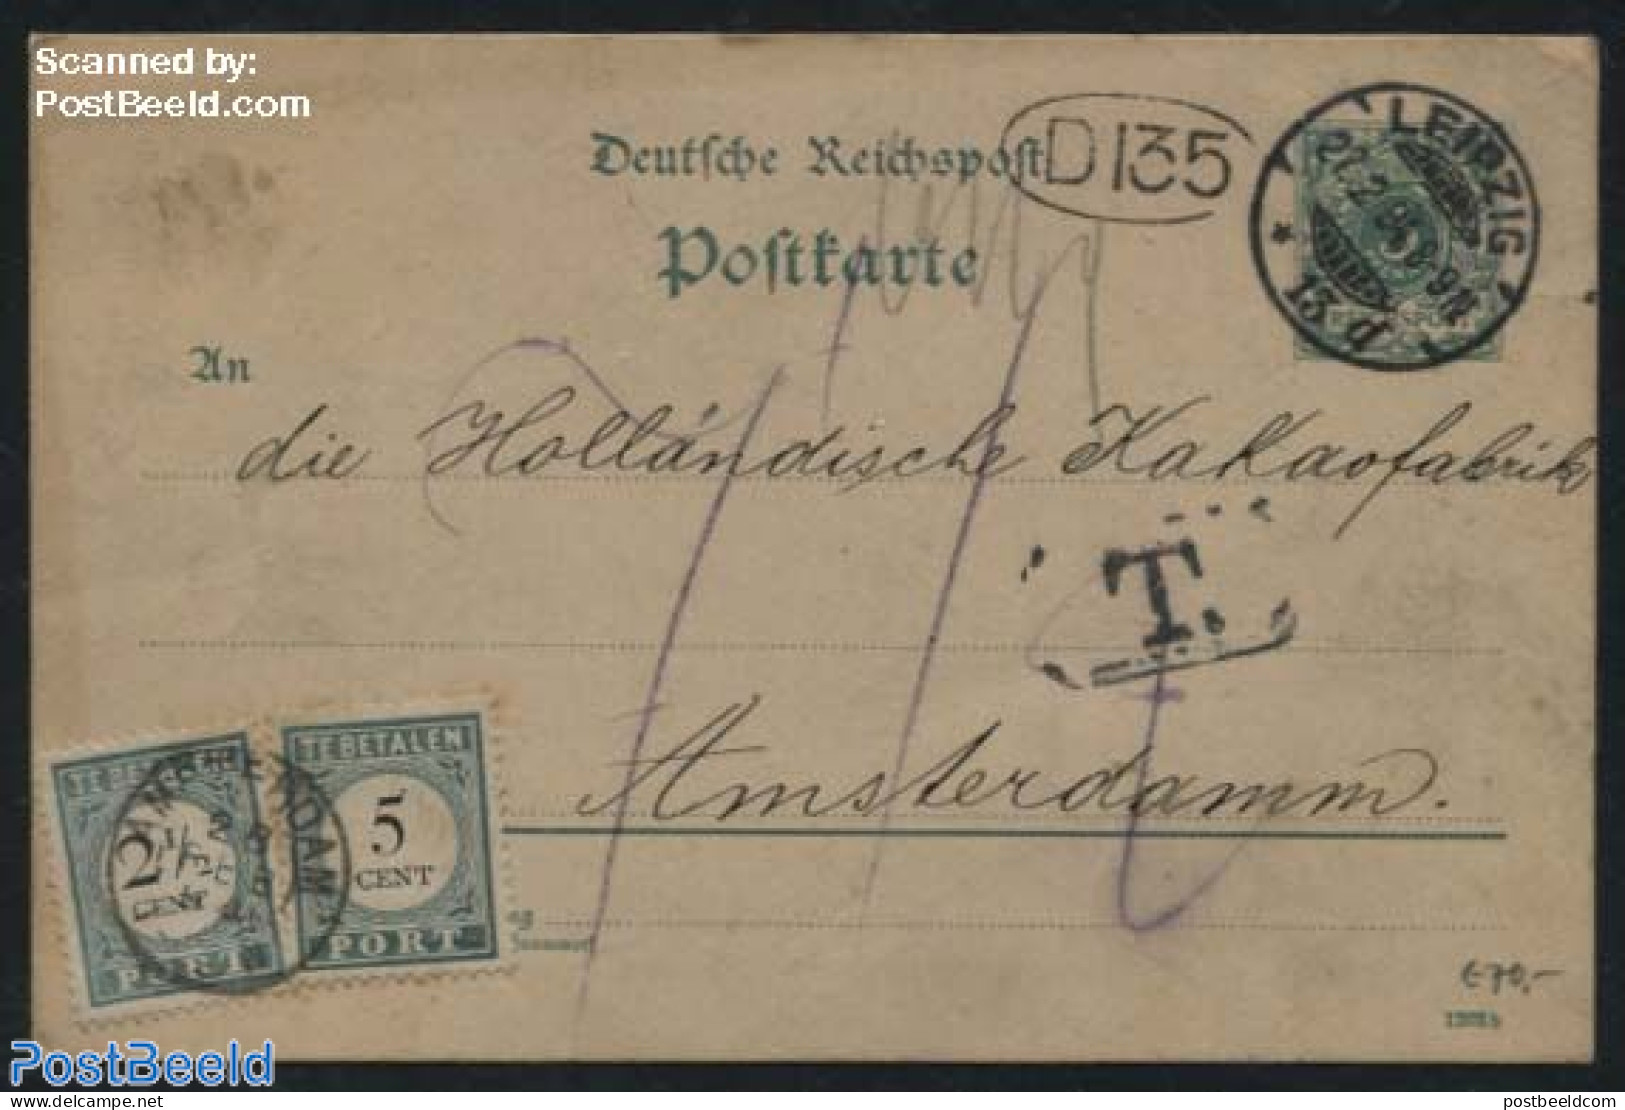 Netherlands 1894 Postcard From Leipzig To Amsterdam, Dutch Postage Due 7.5c, Postal History - Covers & Documents